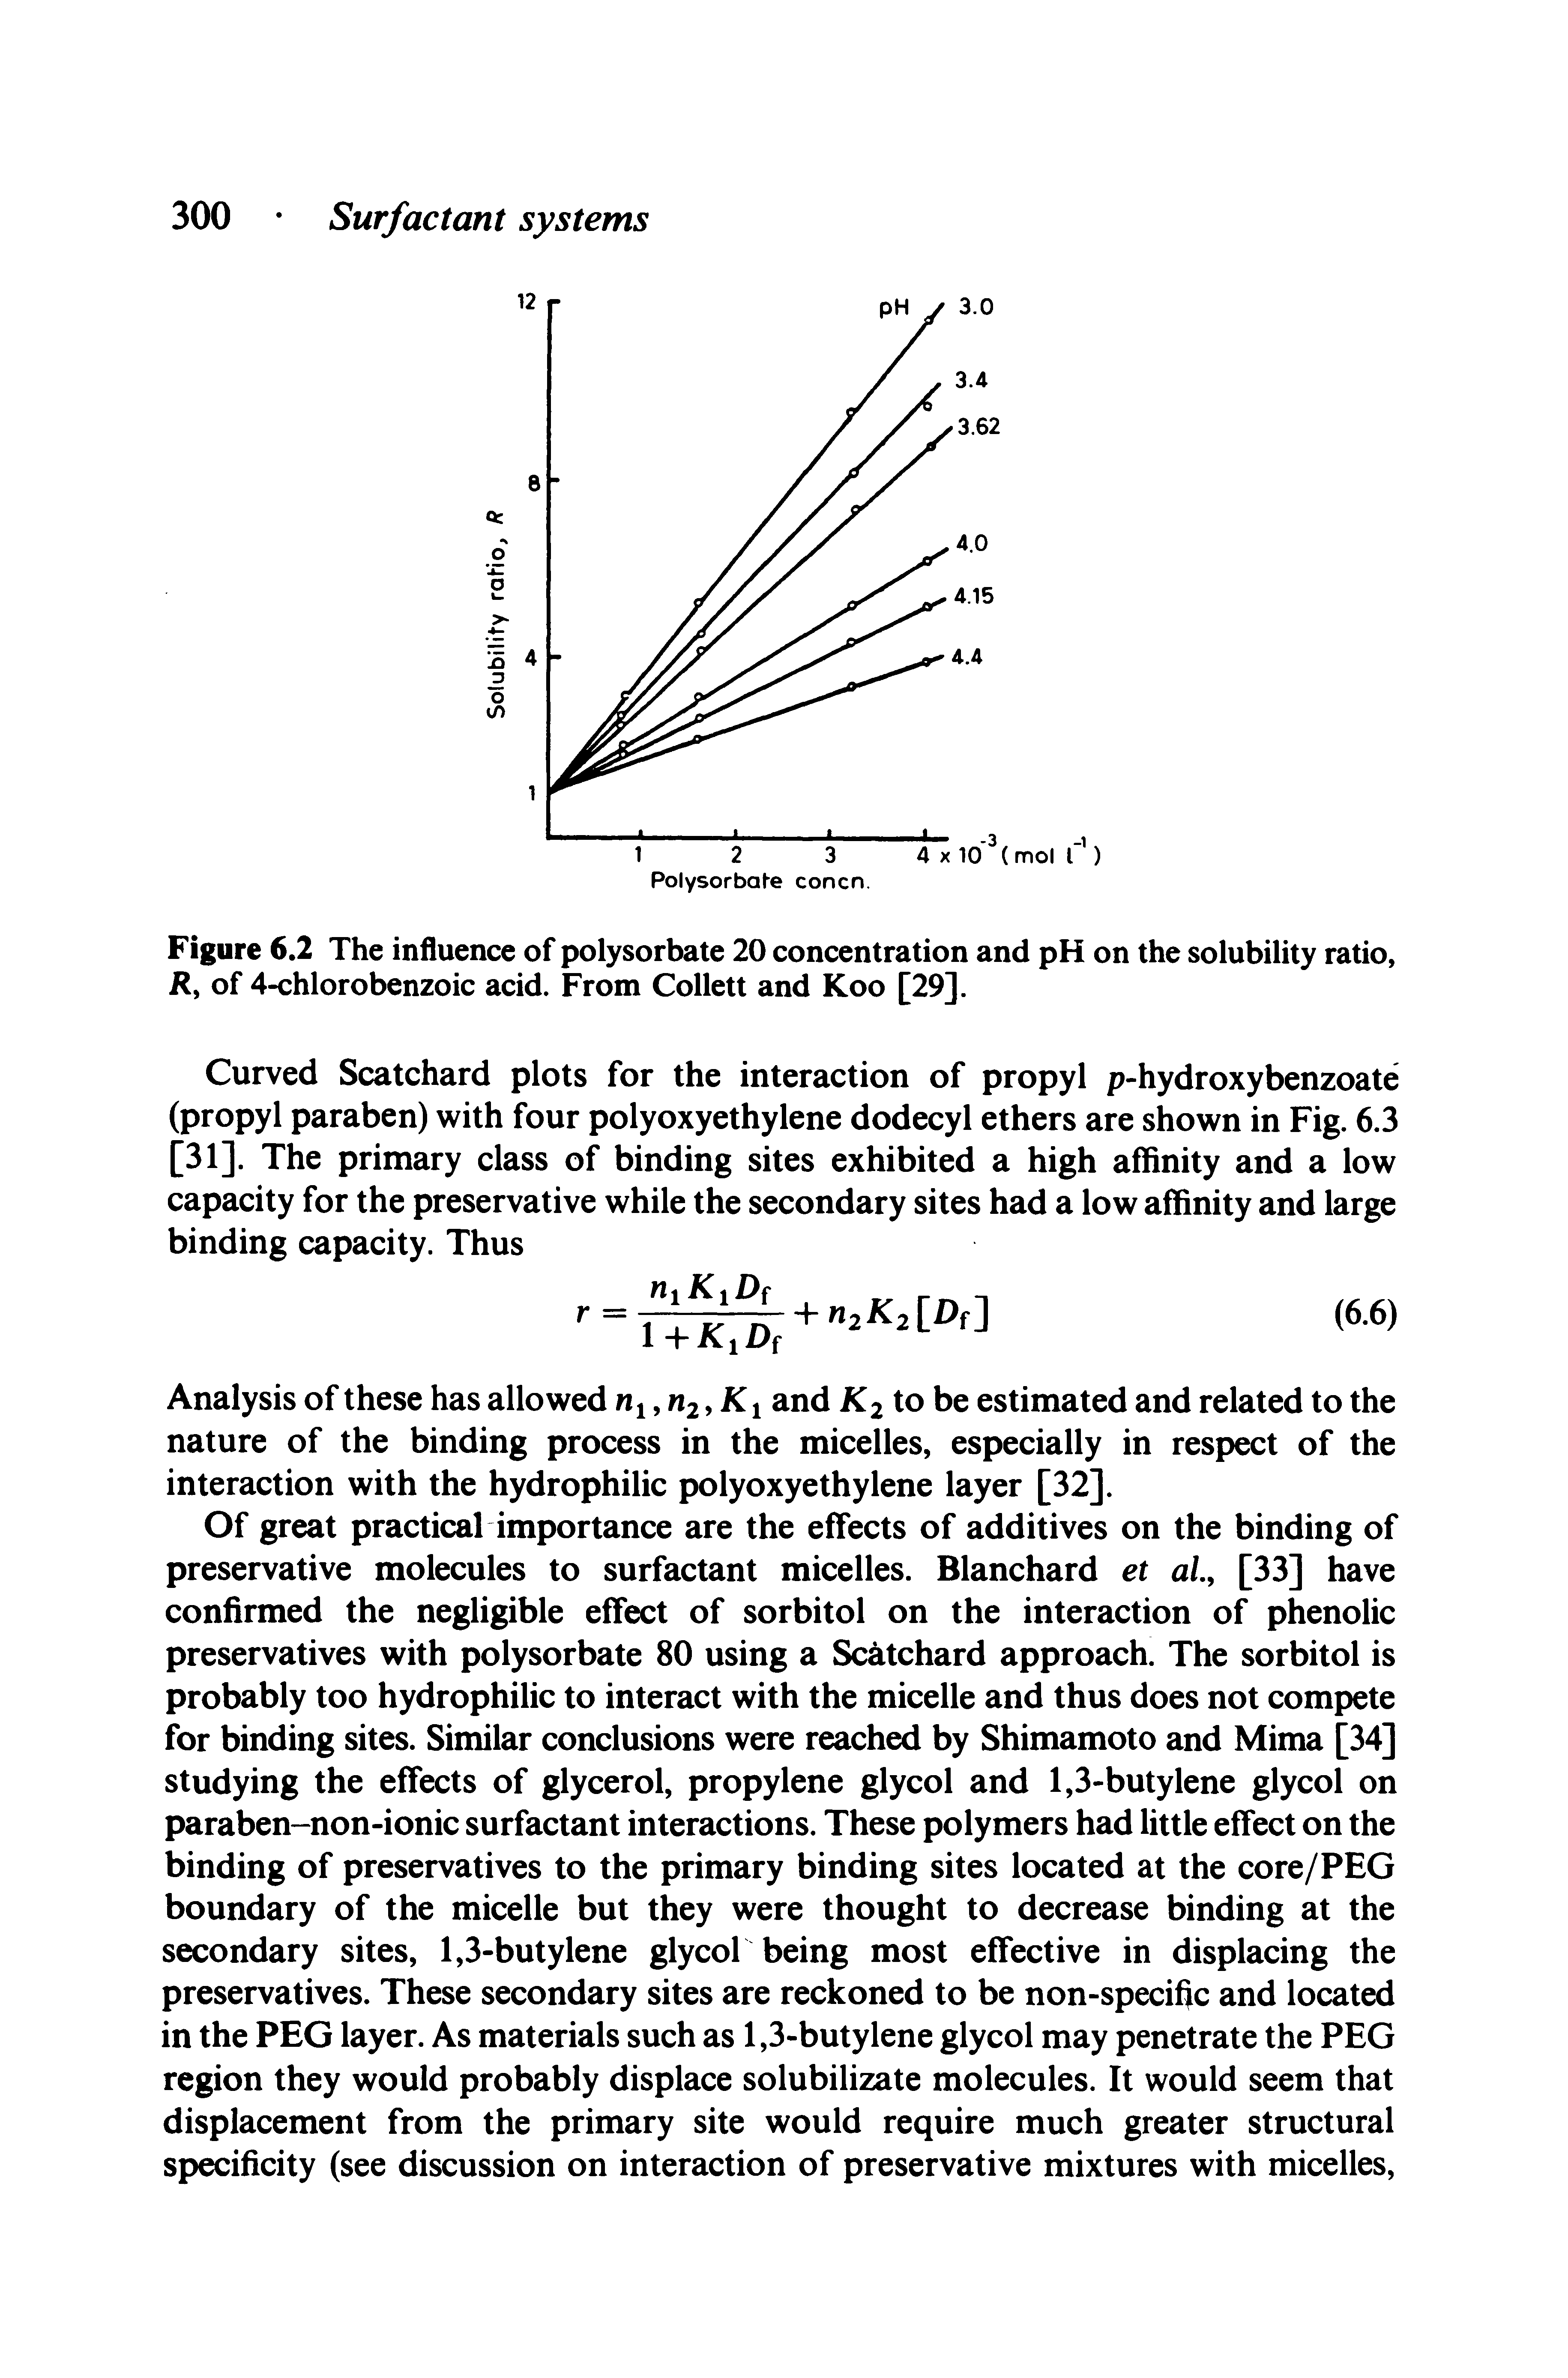 Figure 6.2 The influence of polysorbate 20 concentration and pH on the solubility ratio, K, of 4-chlorobenzoic acid. From Collett and Koo [29].